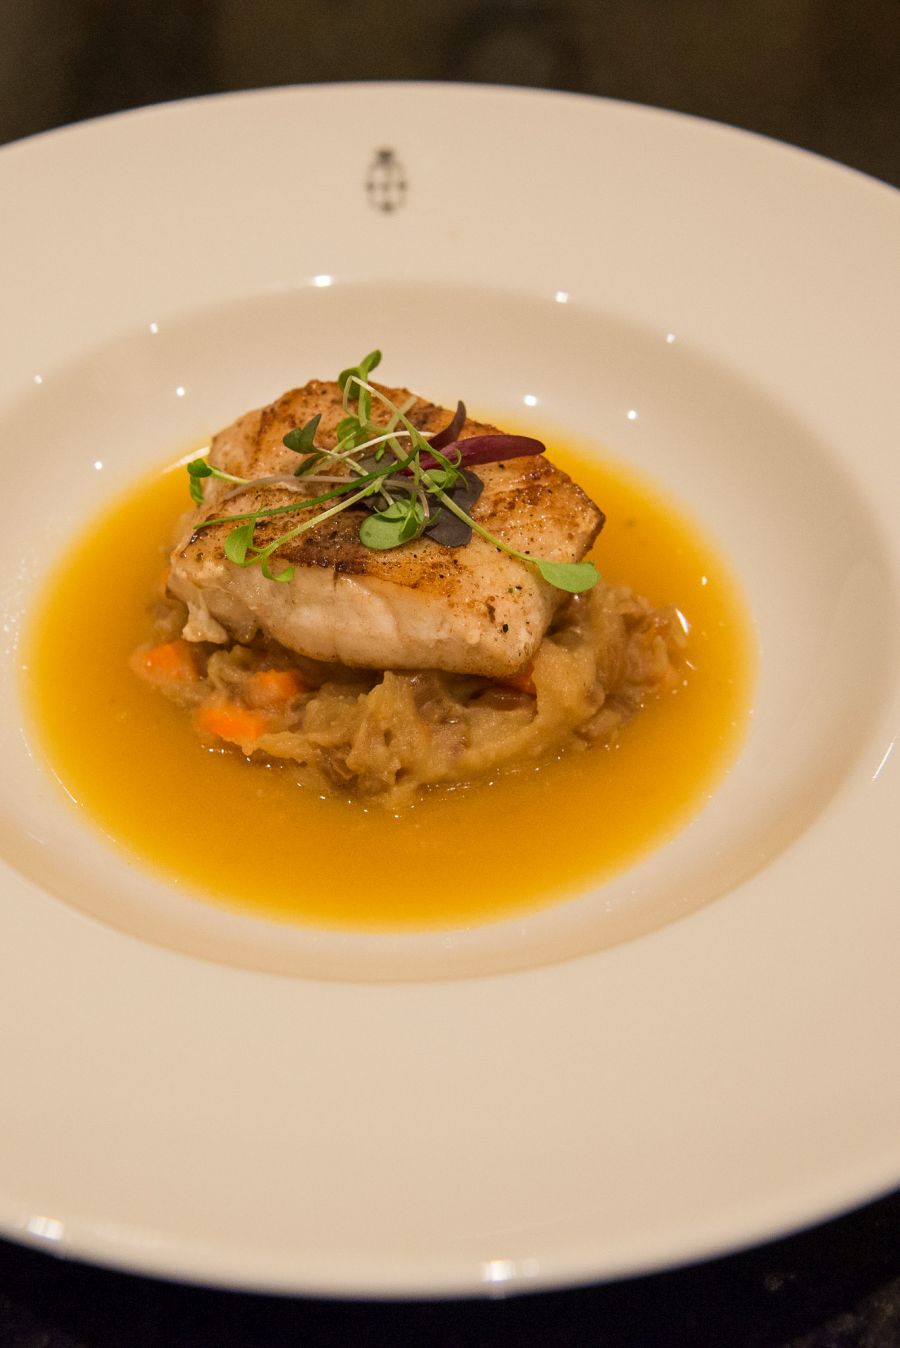 Fish course: grouper with crustacean sauce and hutspot, a Dutch dish of mashed potato, carrots and onions